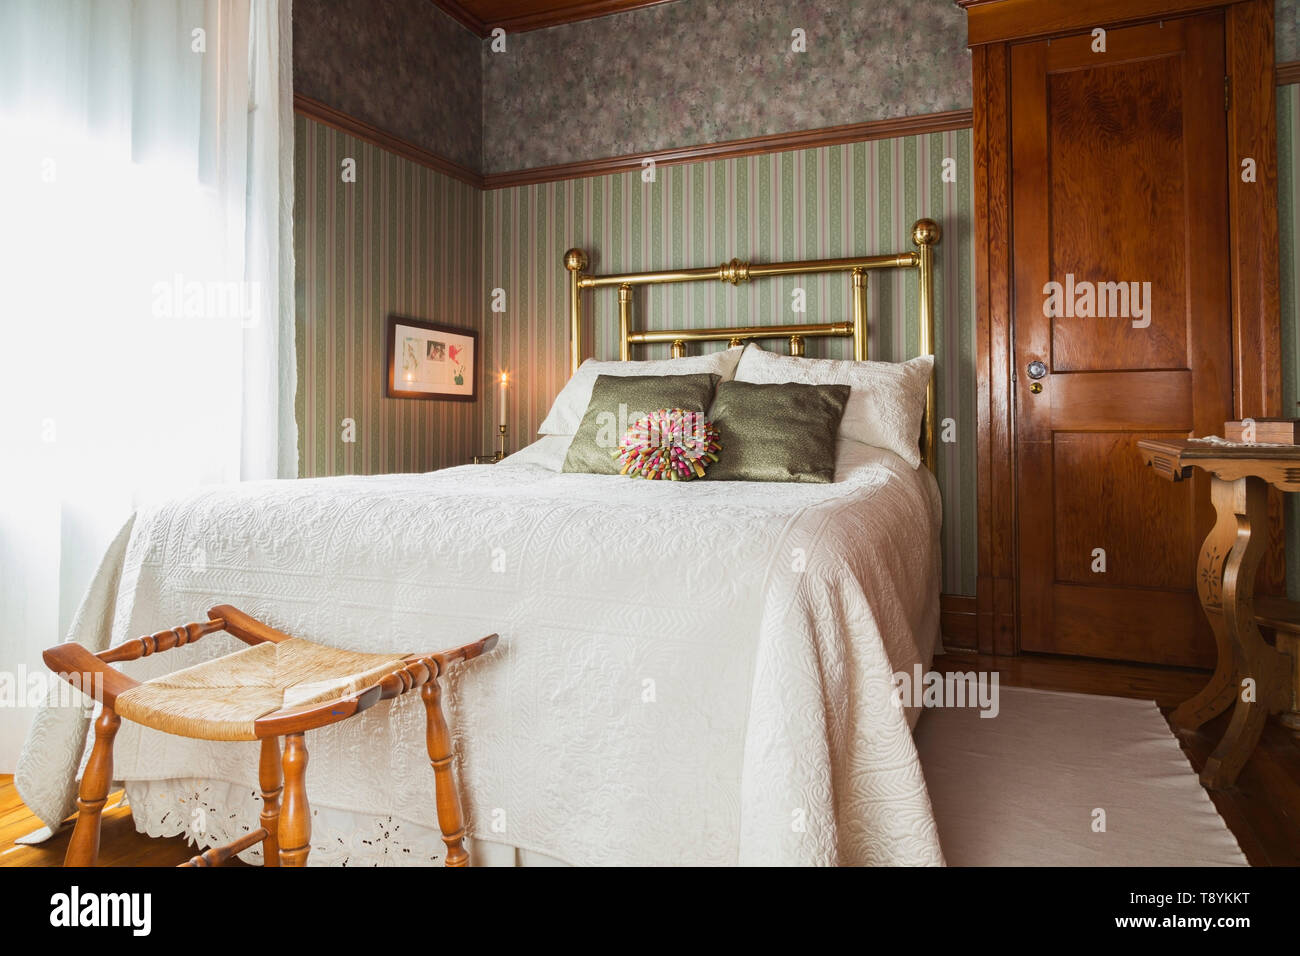 Double bed with white bedspread and brass headboard, wooden night table in upstairs master bedroom inside an old 1927 American Four Squares house, Quebec, Canada. This image is property released. CUPR0221 Stock Photo